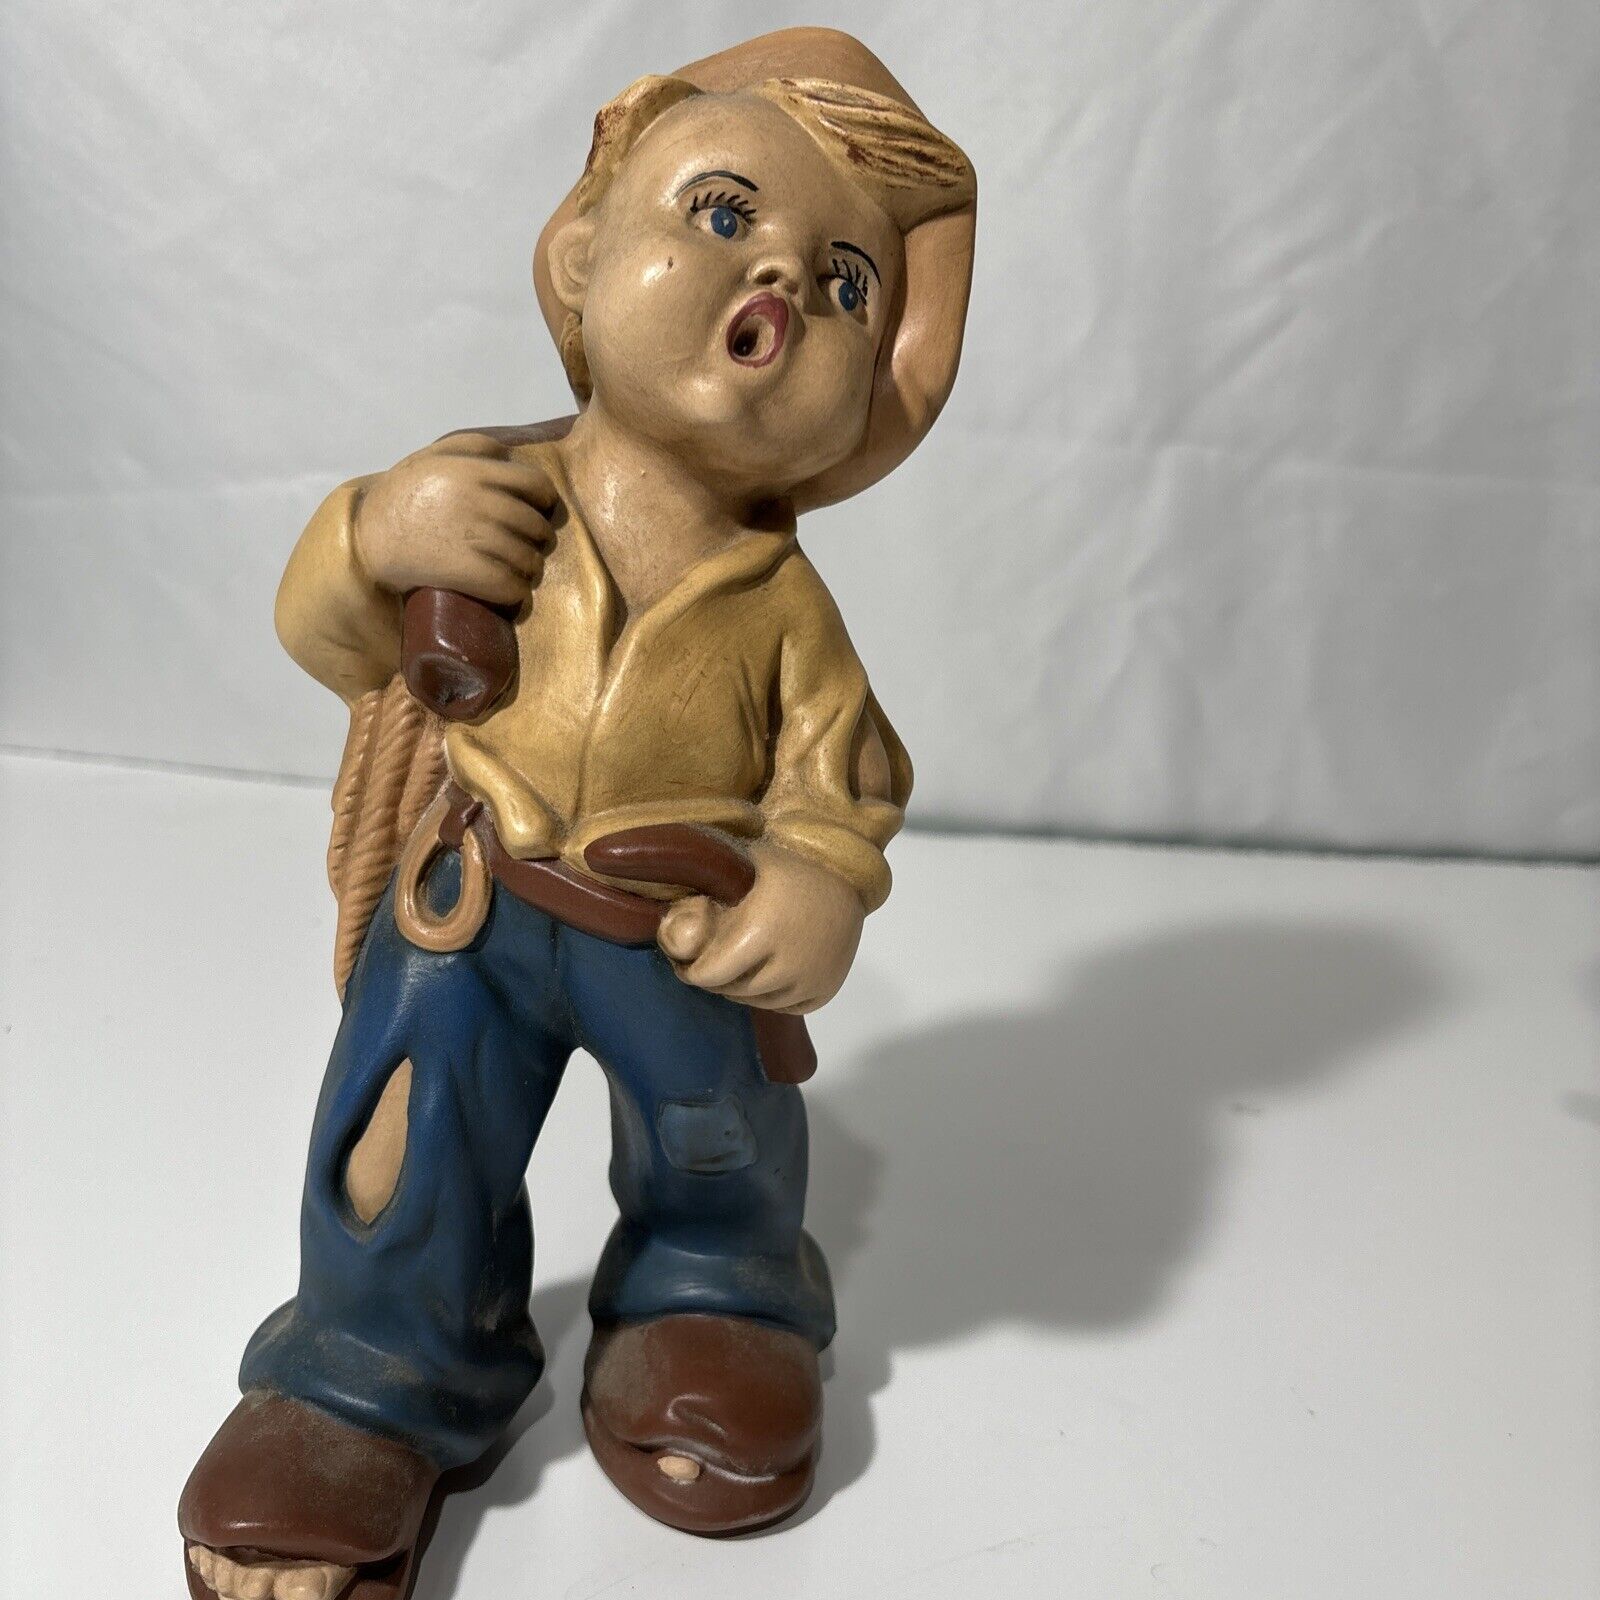 Vagabond Boy Vintage 1970s Chalkware HEAVY Figure 9.5 Inch Whistling Colorful